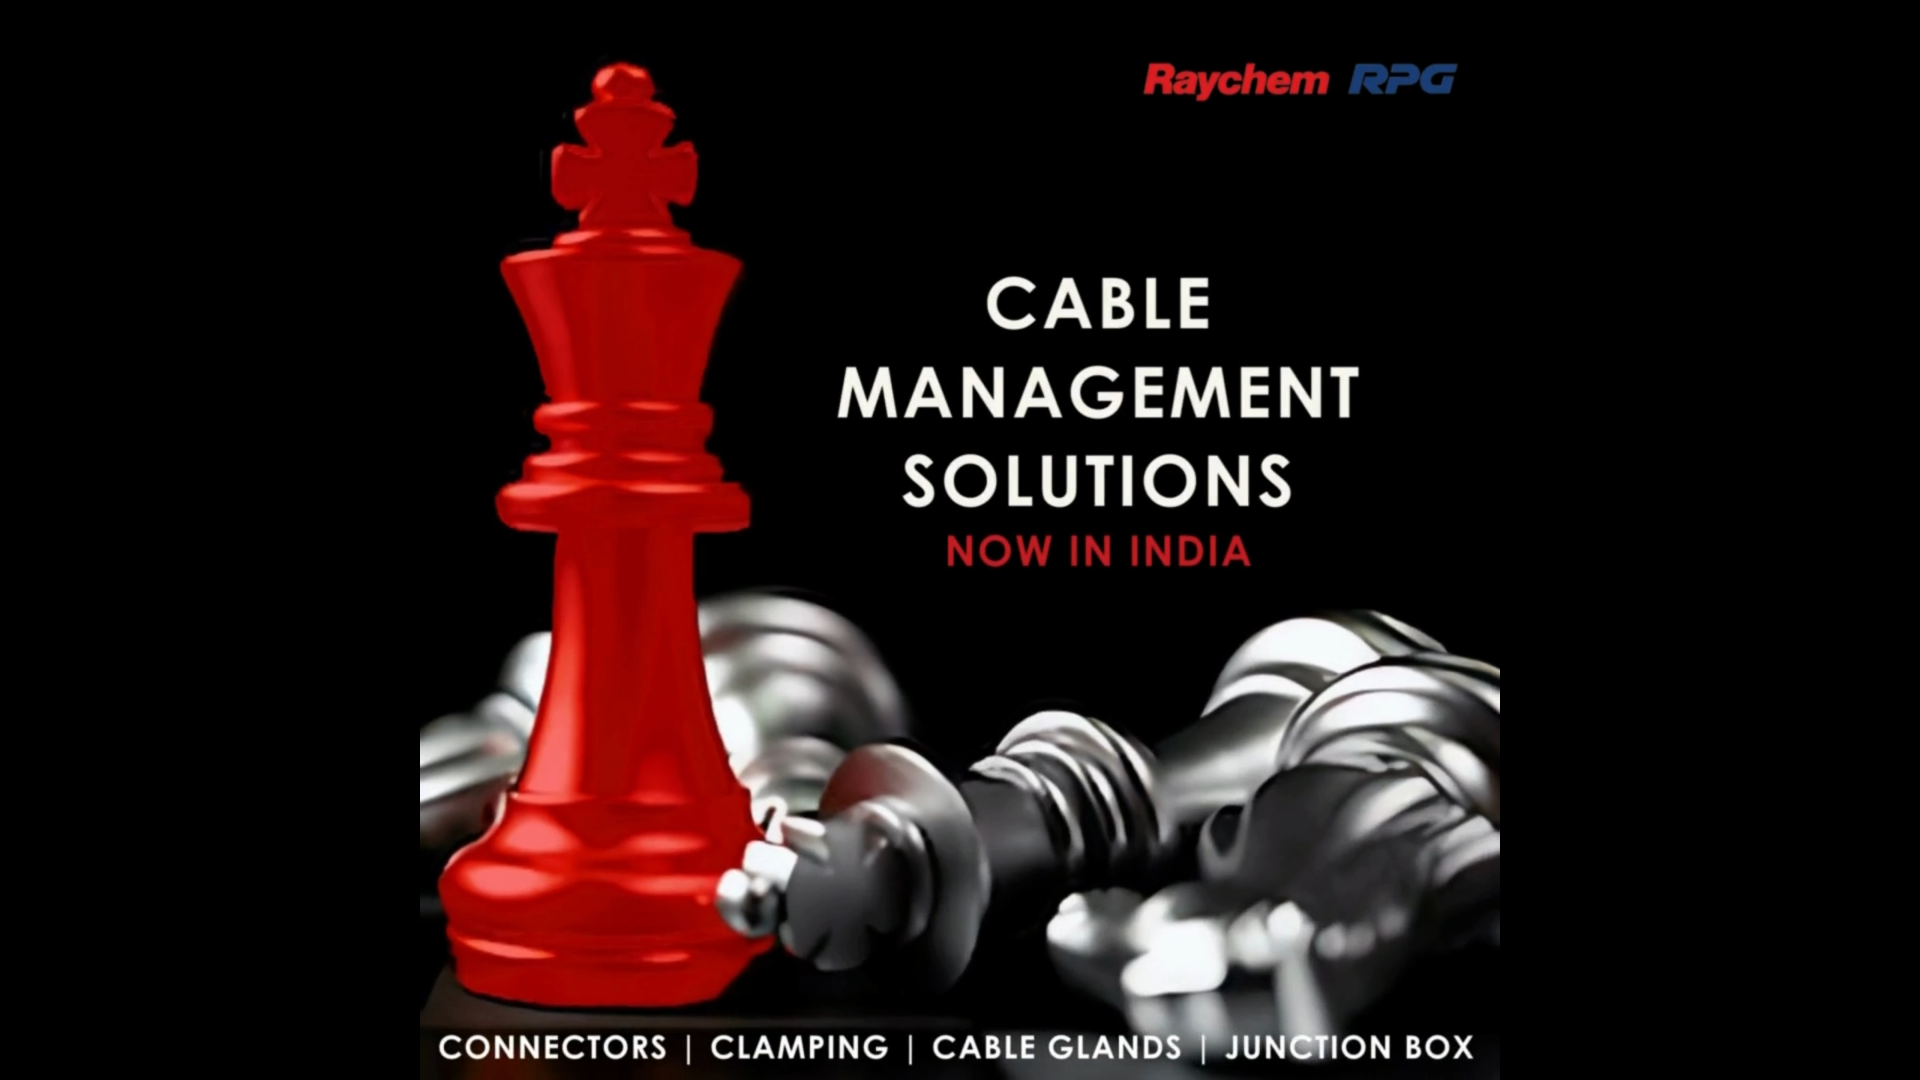 Raychem RPG's Cable Management Solutions Now in India